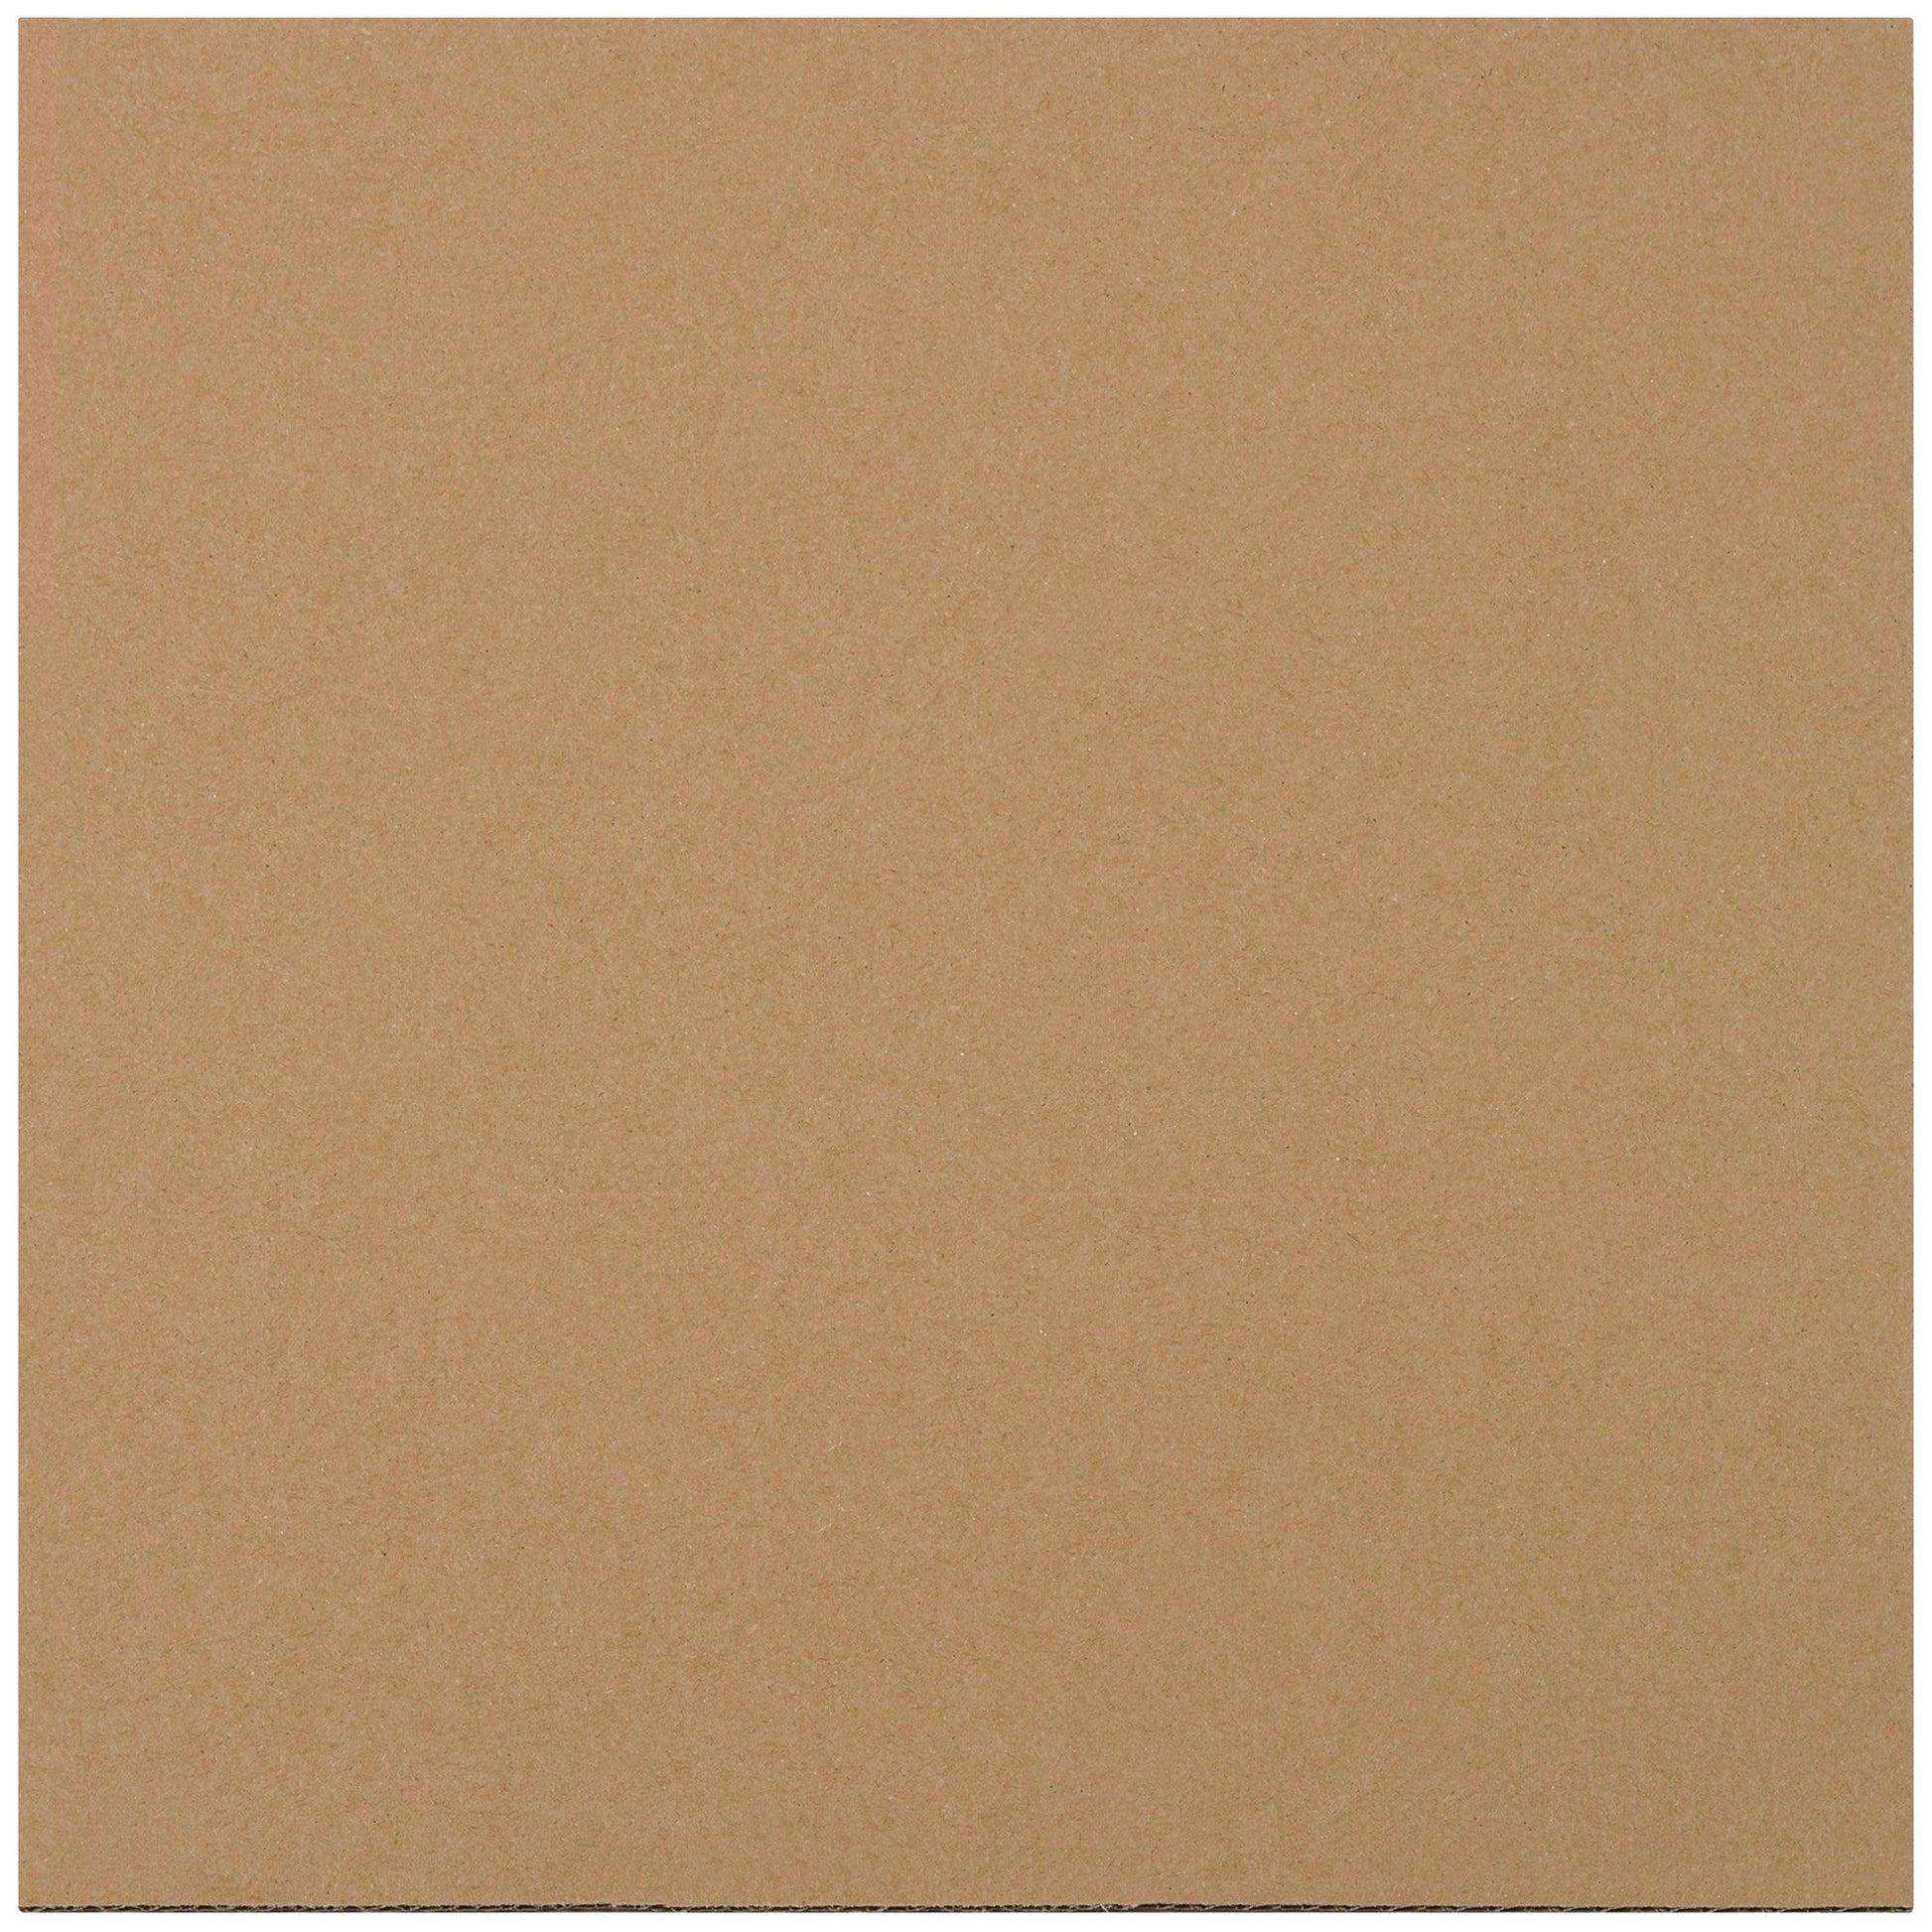 15 7/8 x 15 7/8" Corrugated Layer Pads - SP15